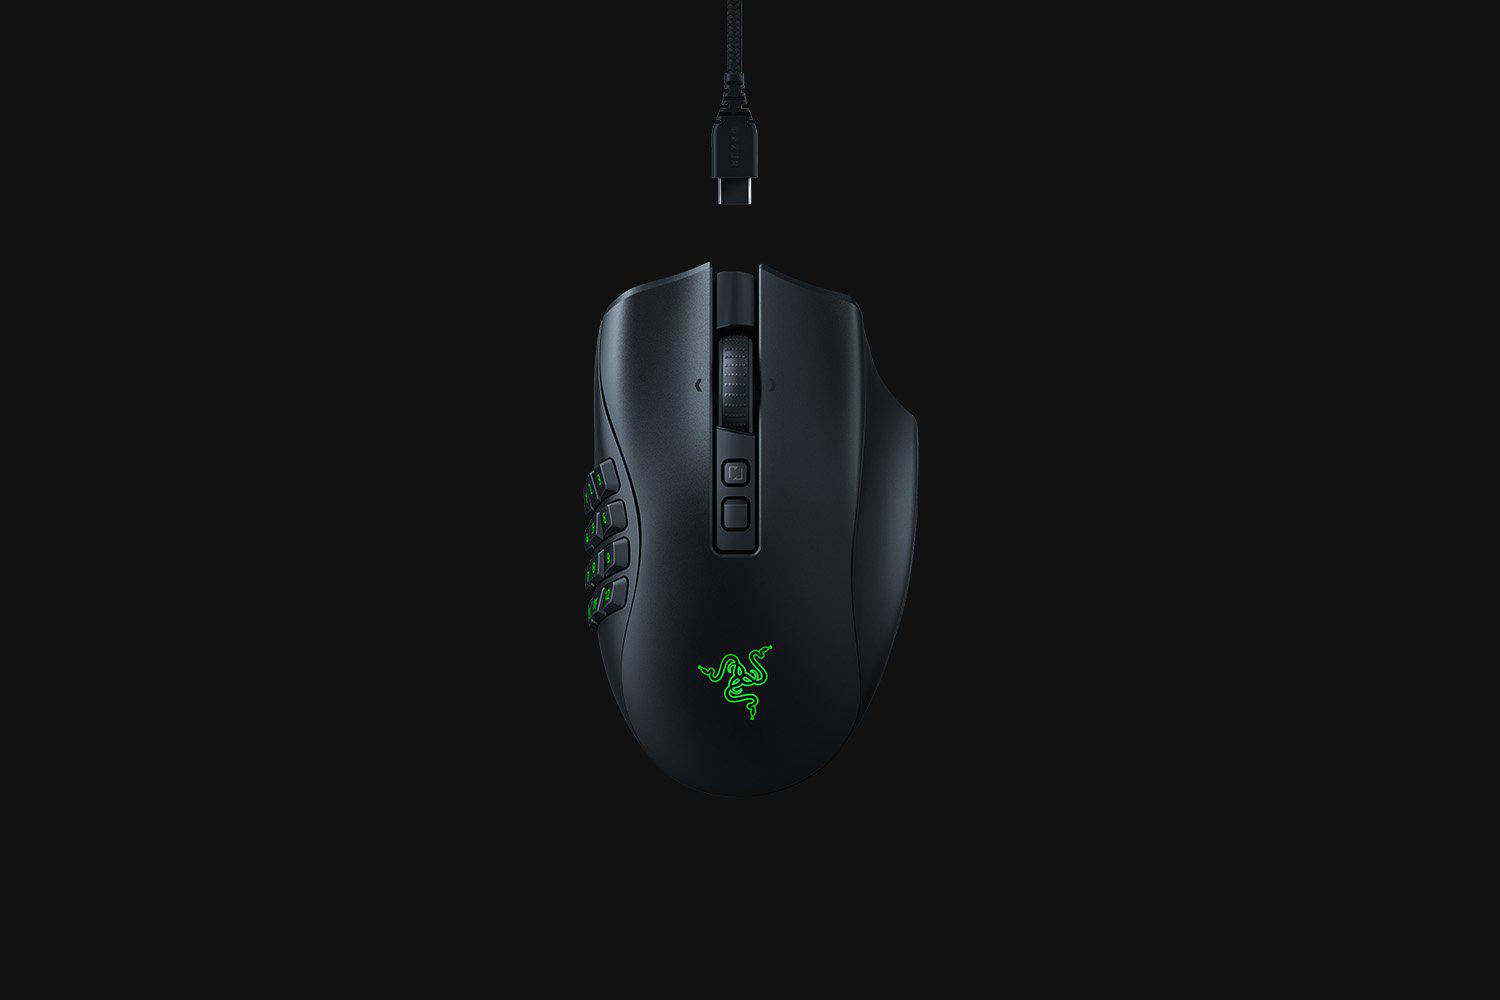 Mouse Razer Naga V2 PRO  Connectivity       Razer HyperSpeed Wireless (2.4GHz)     Bluetooth     Wired – Speedflex Cable USB Type C  Battery Life       Up to 150 hours (on HyperSpeed Wireless)     Up to 300 hours (on Bluetooth)  RGB Lighting  Razer Chroma RGB (Logo, and 12 button side plate) Sensor